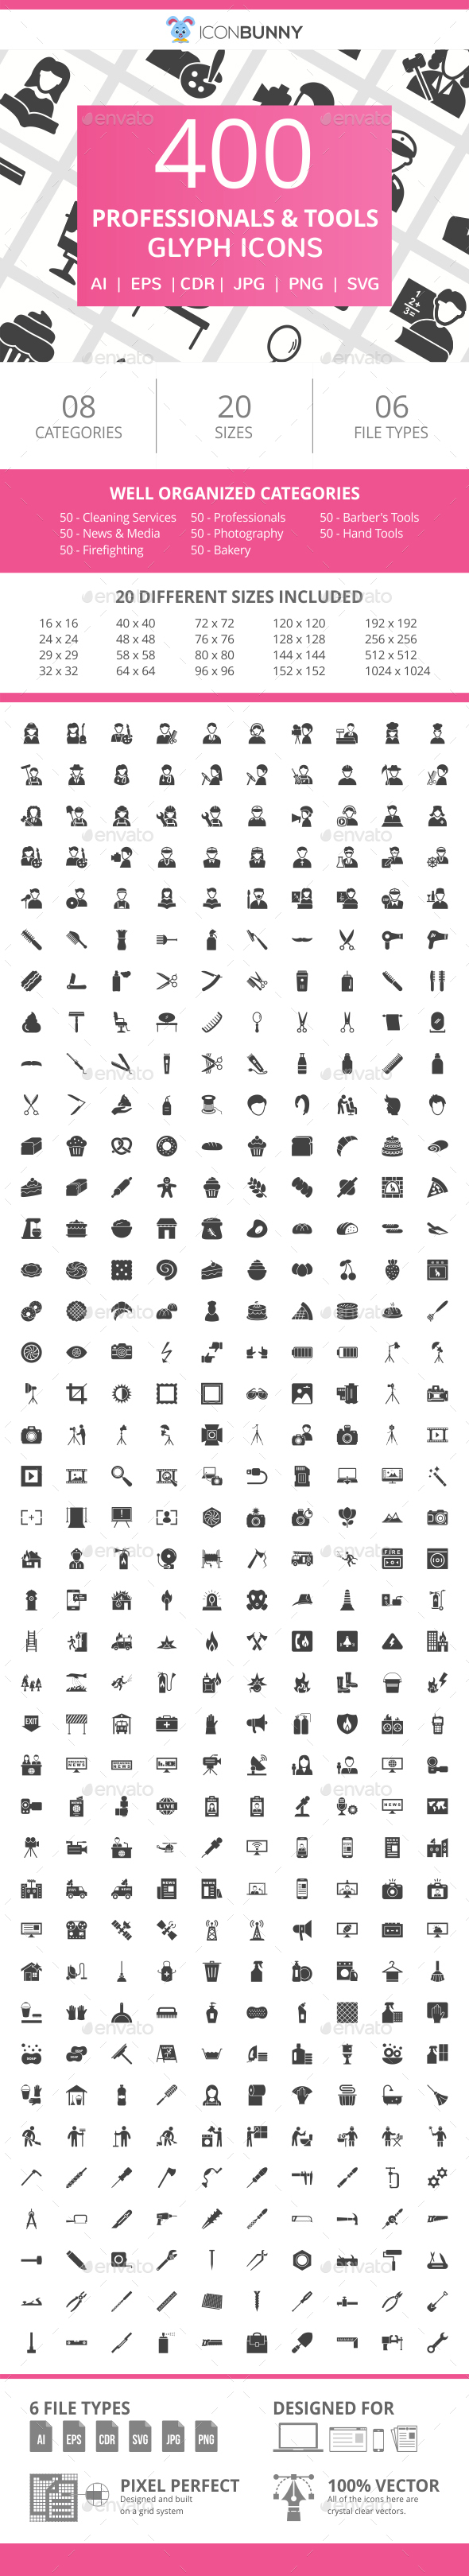 400 Professionals & their Tools Glyph Icons